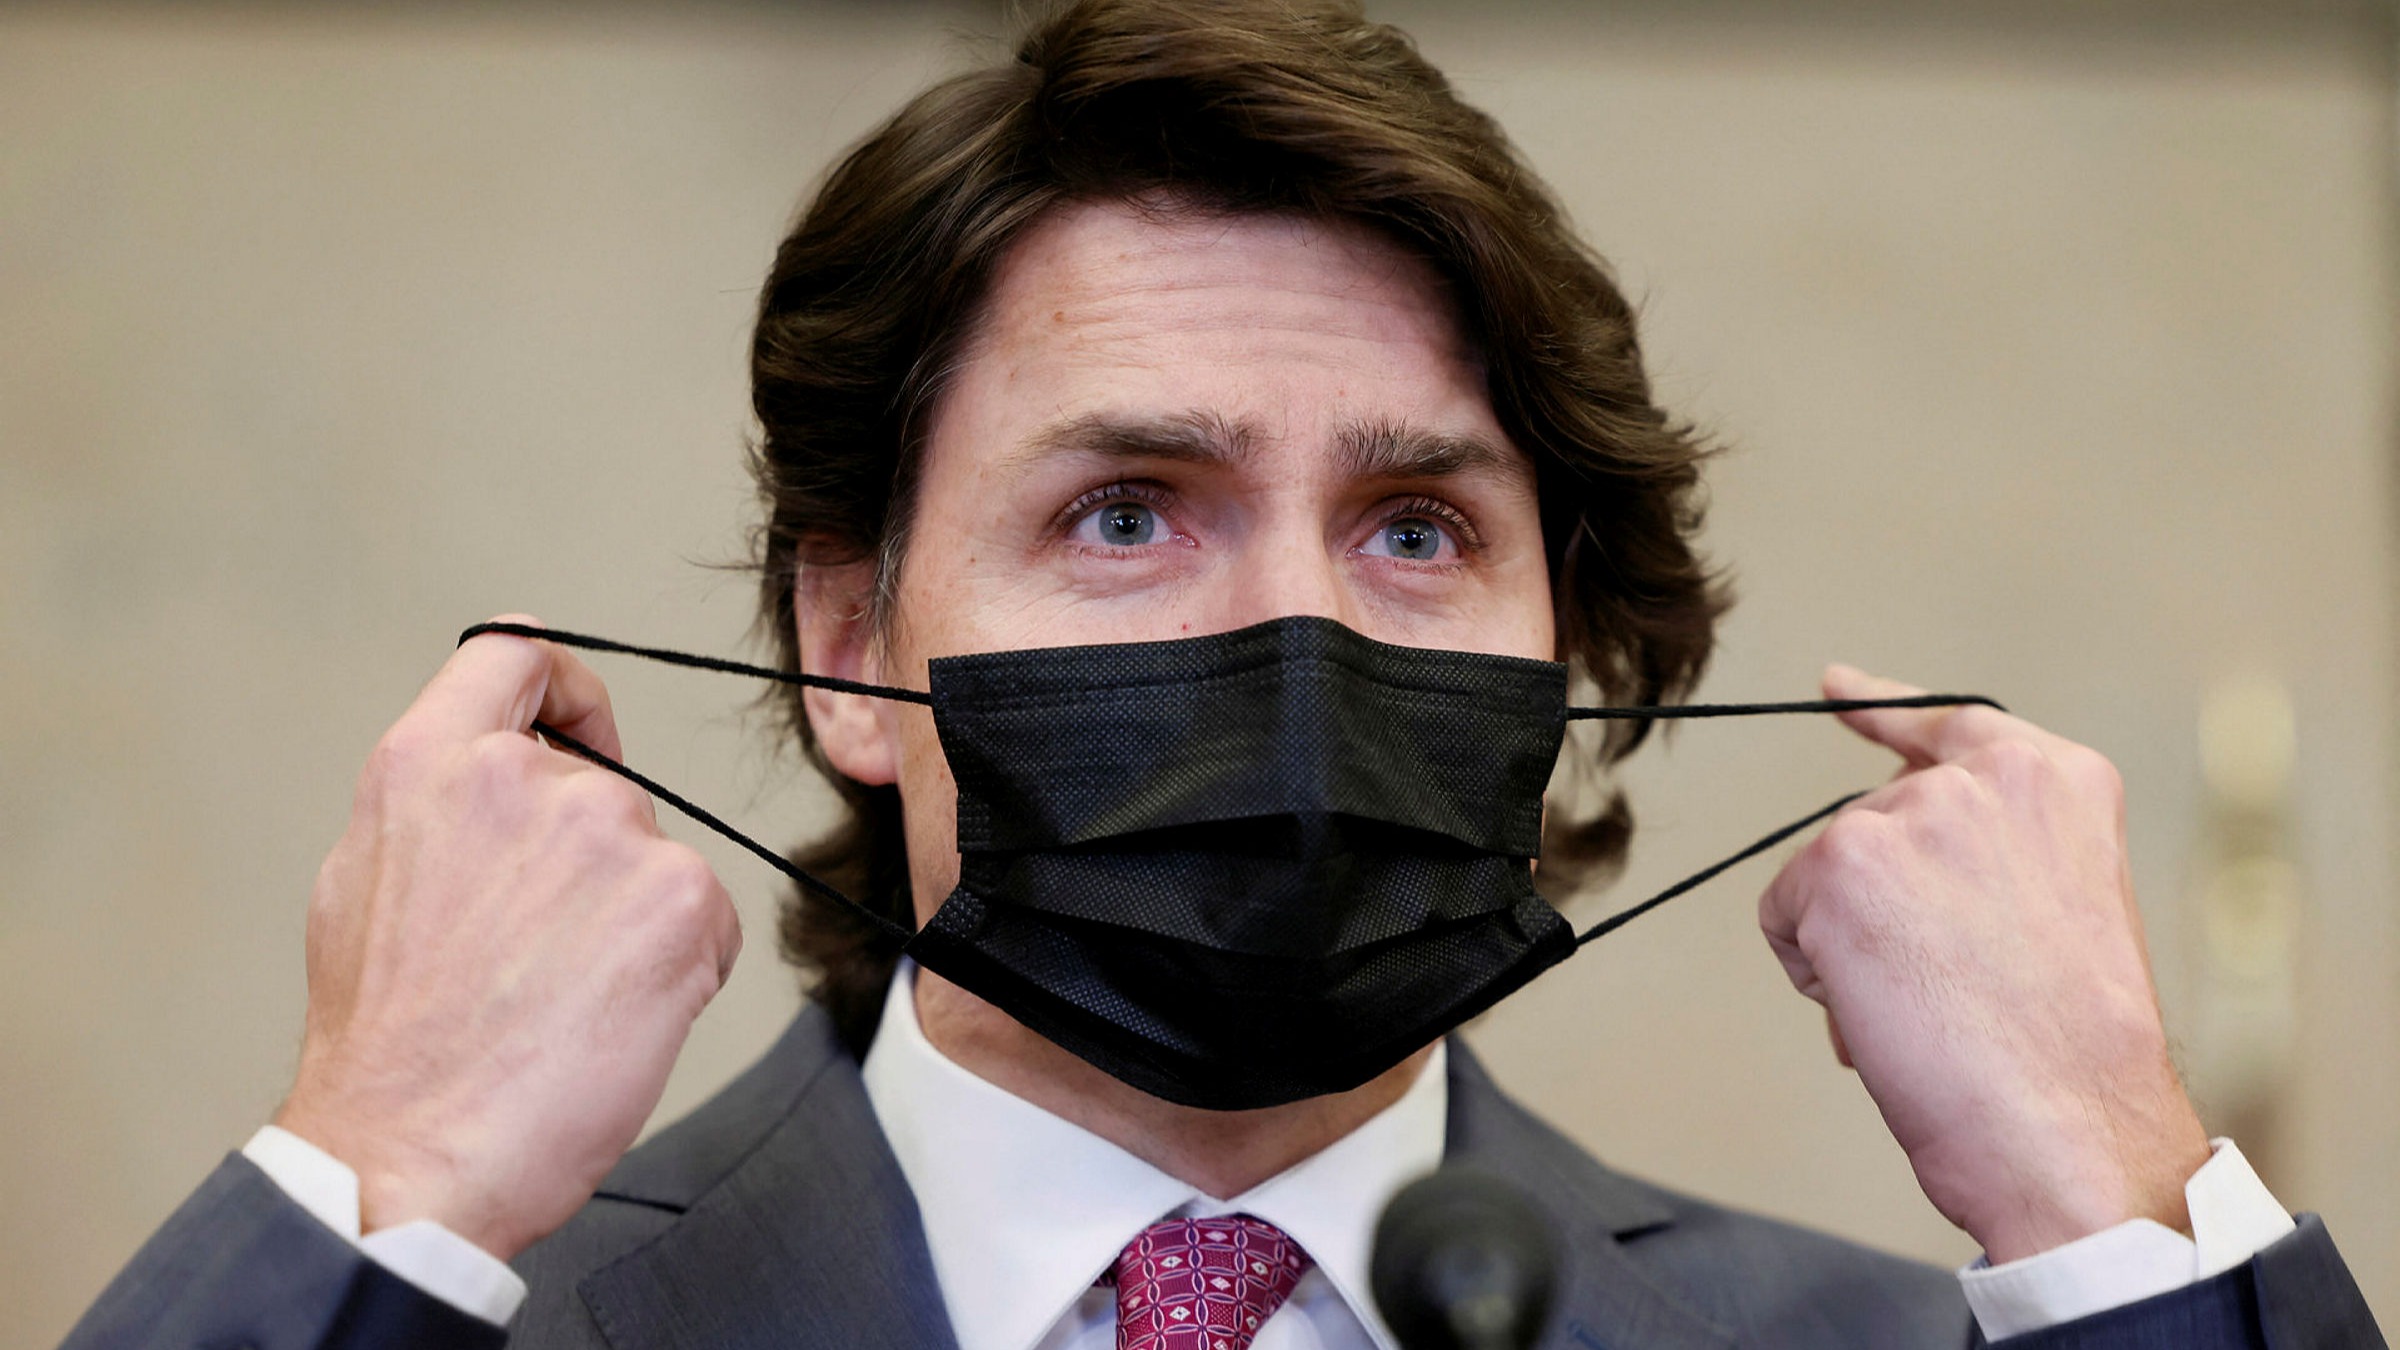 Court documents reveal that Trudeau's travel ban was straight politics (& other stories)